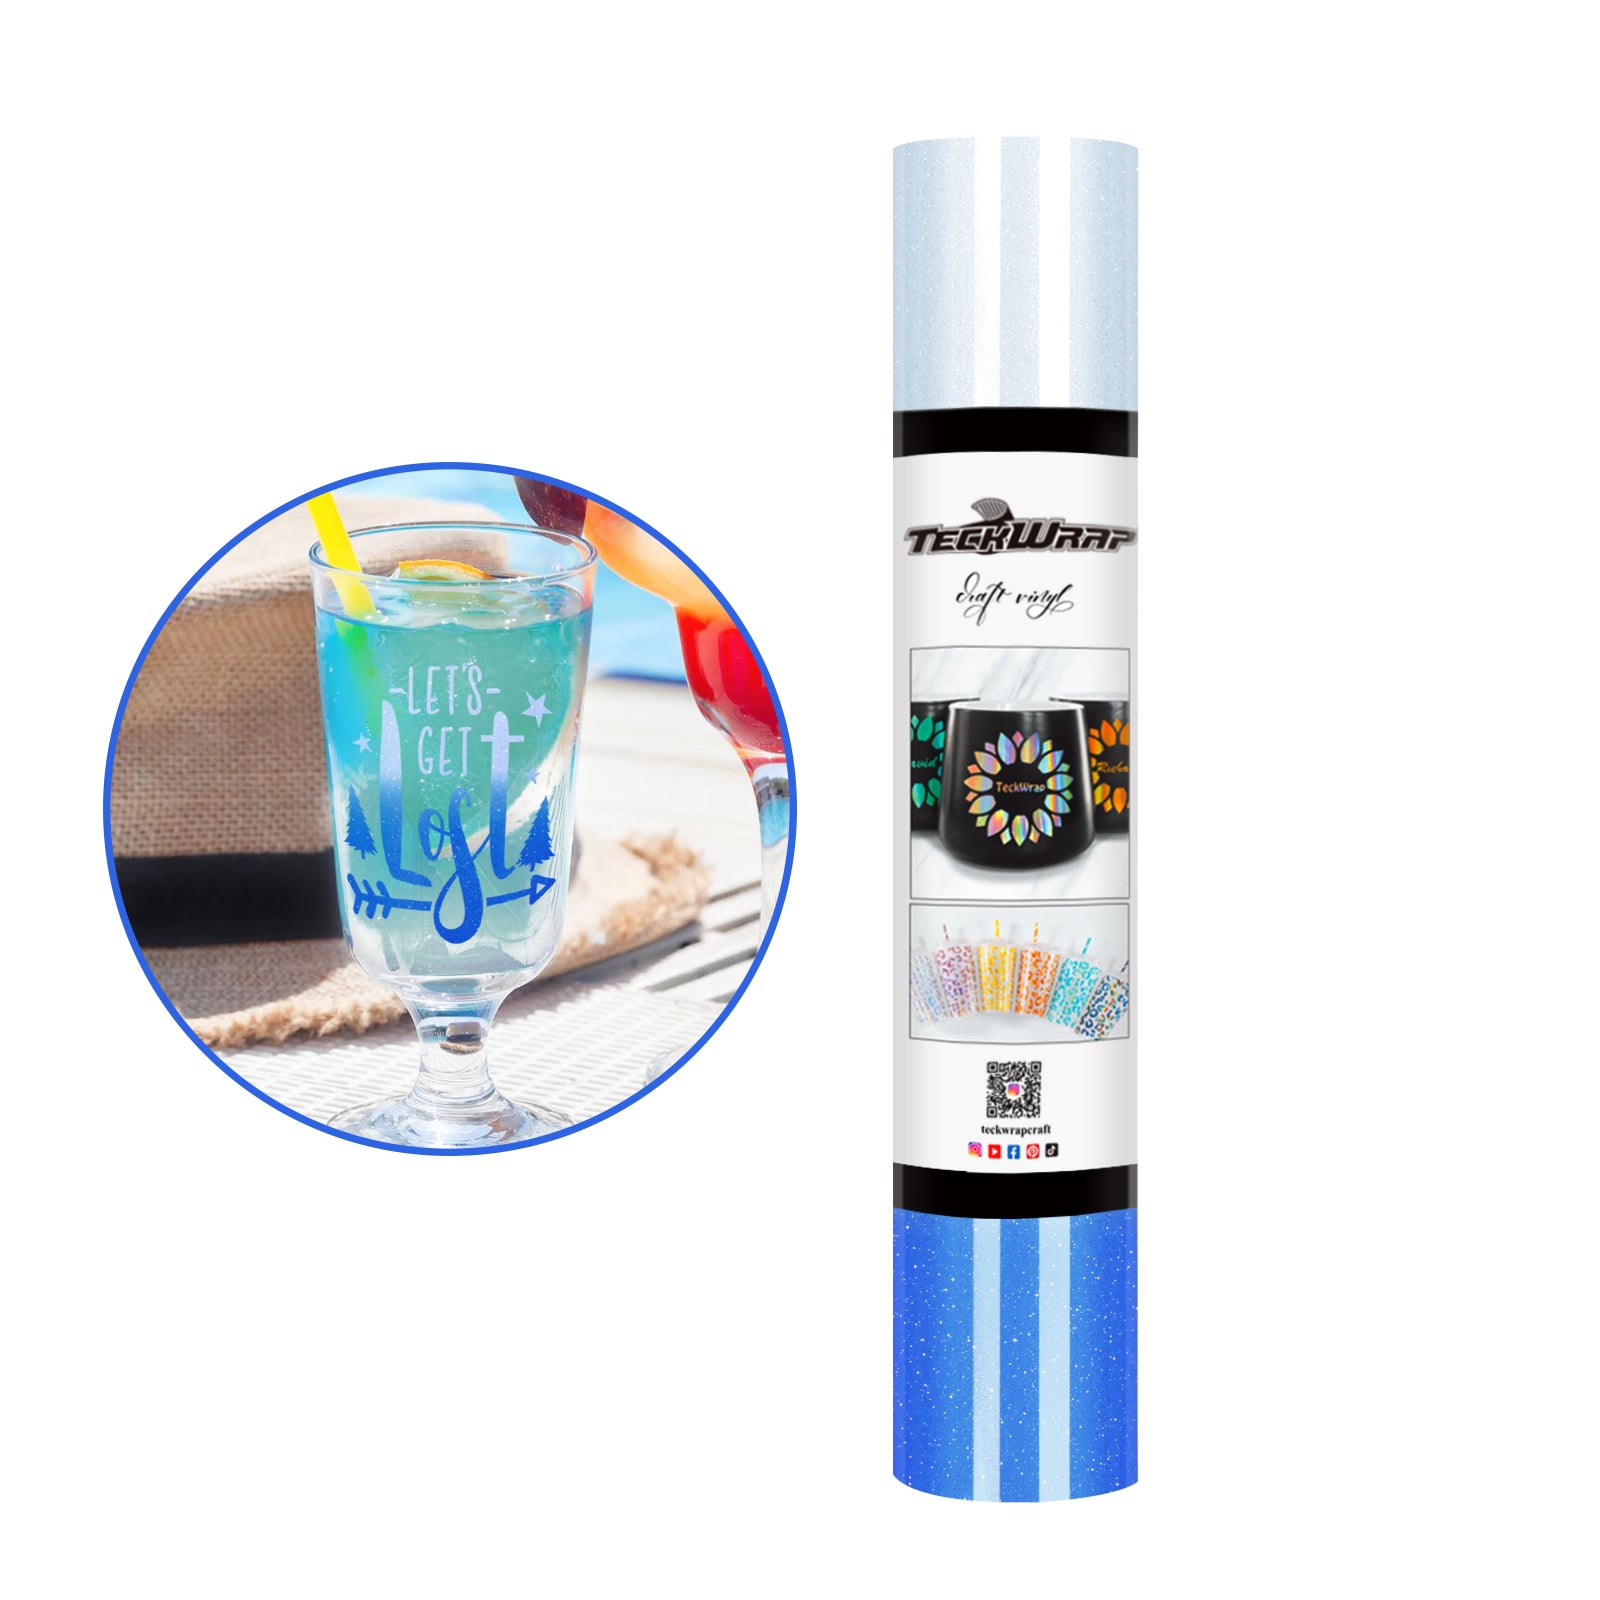 Shimmer Cold Color Change Adhesive Vinyl - 5ft / White to Blue - TeckwrapCraft